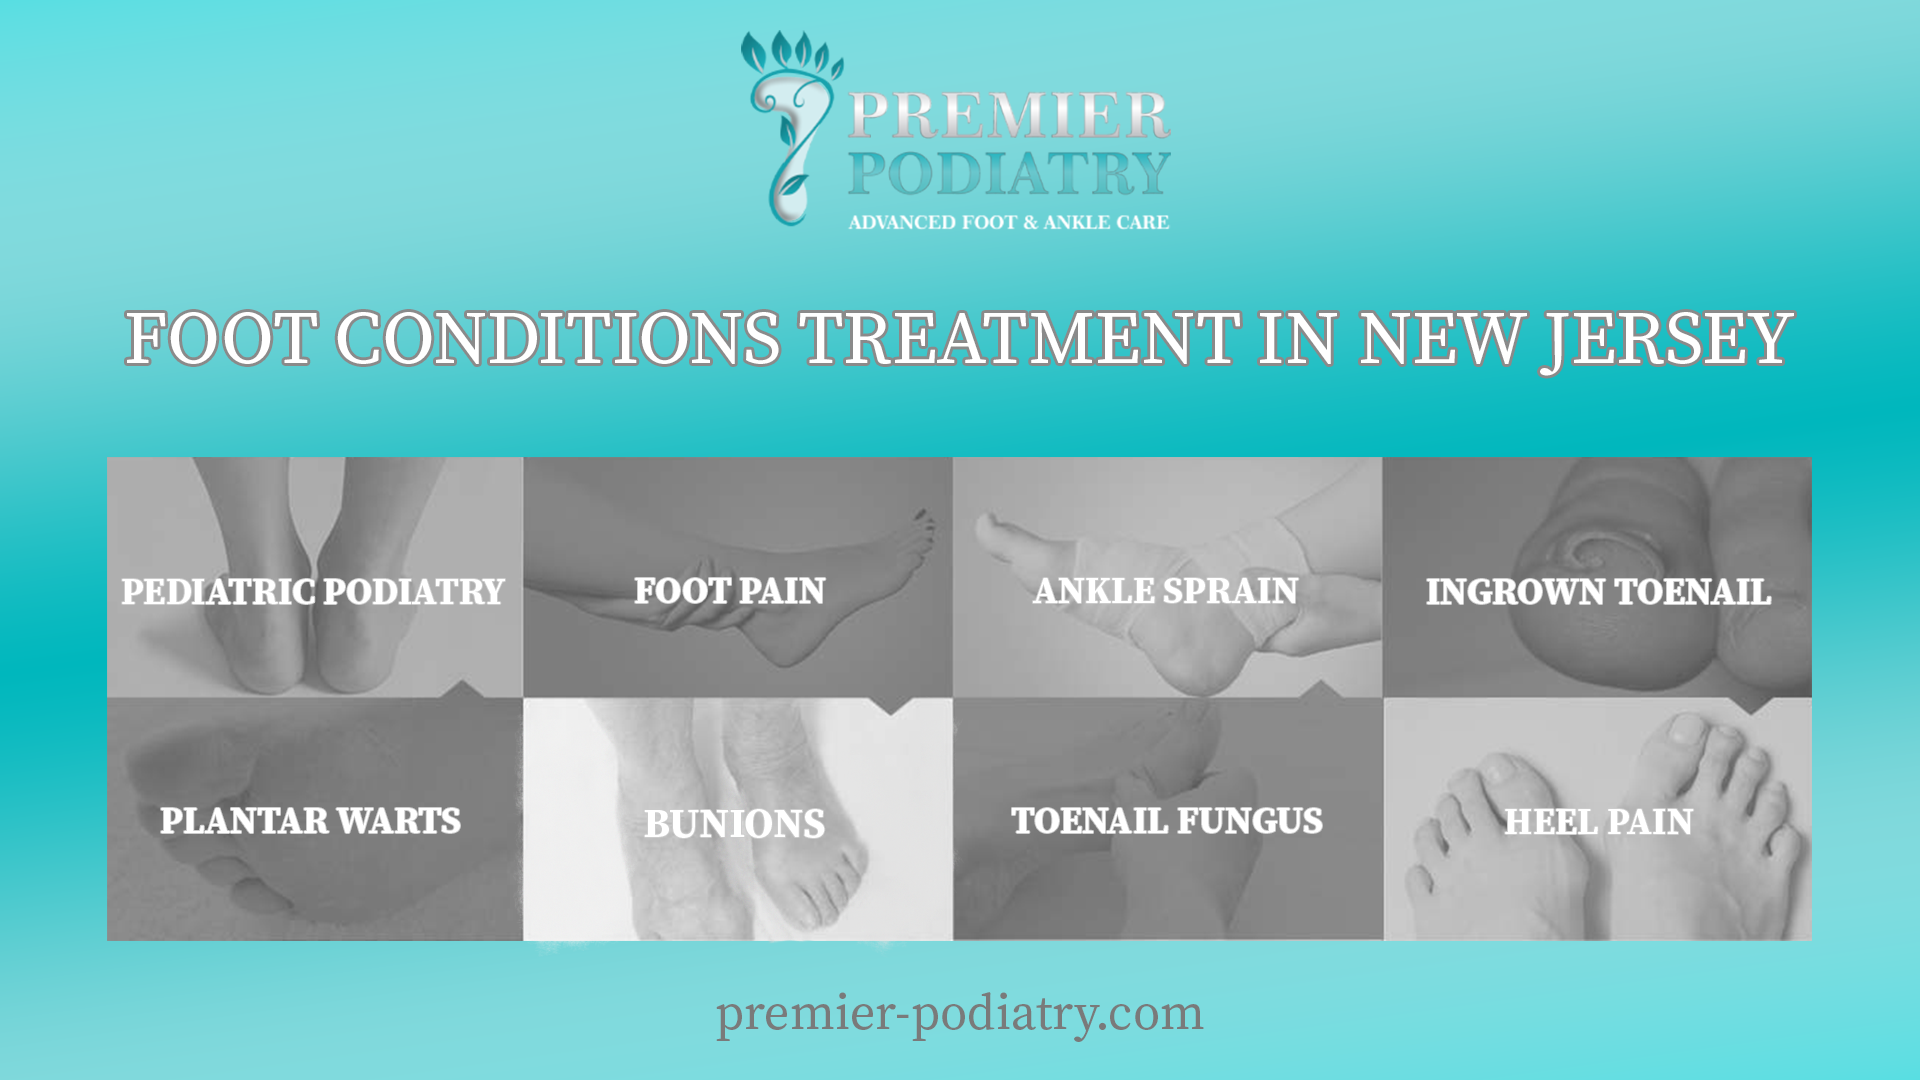 FOOT CONDITIONS TREATMENT IN NEW JERSEY'